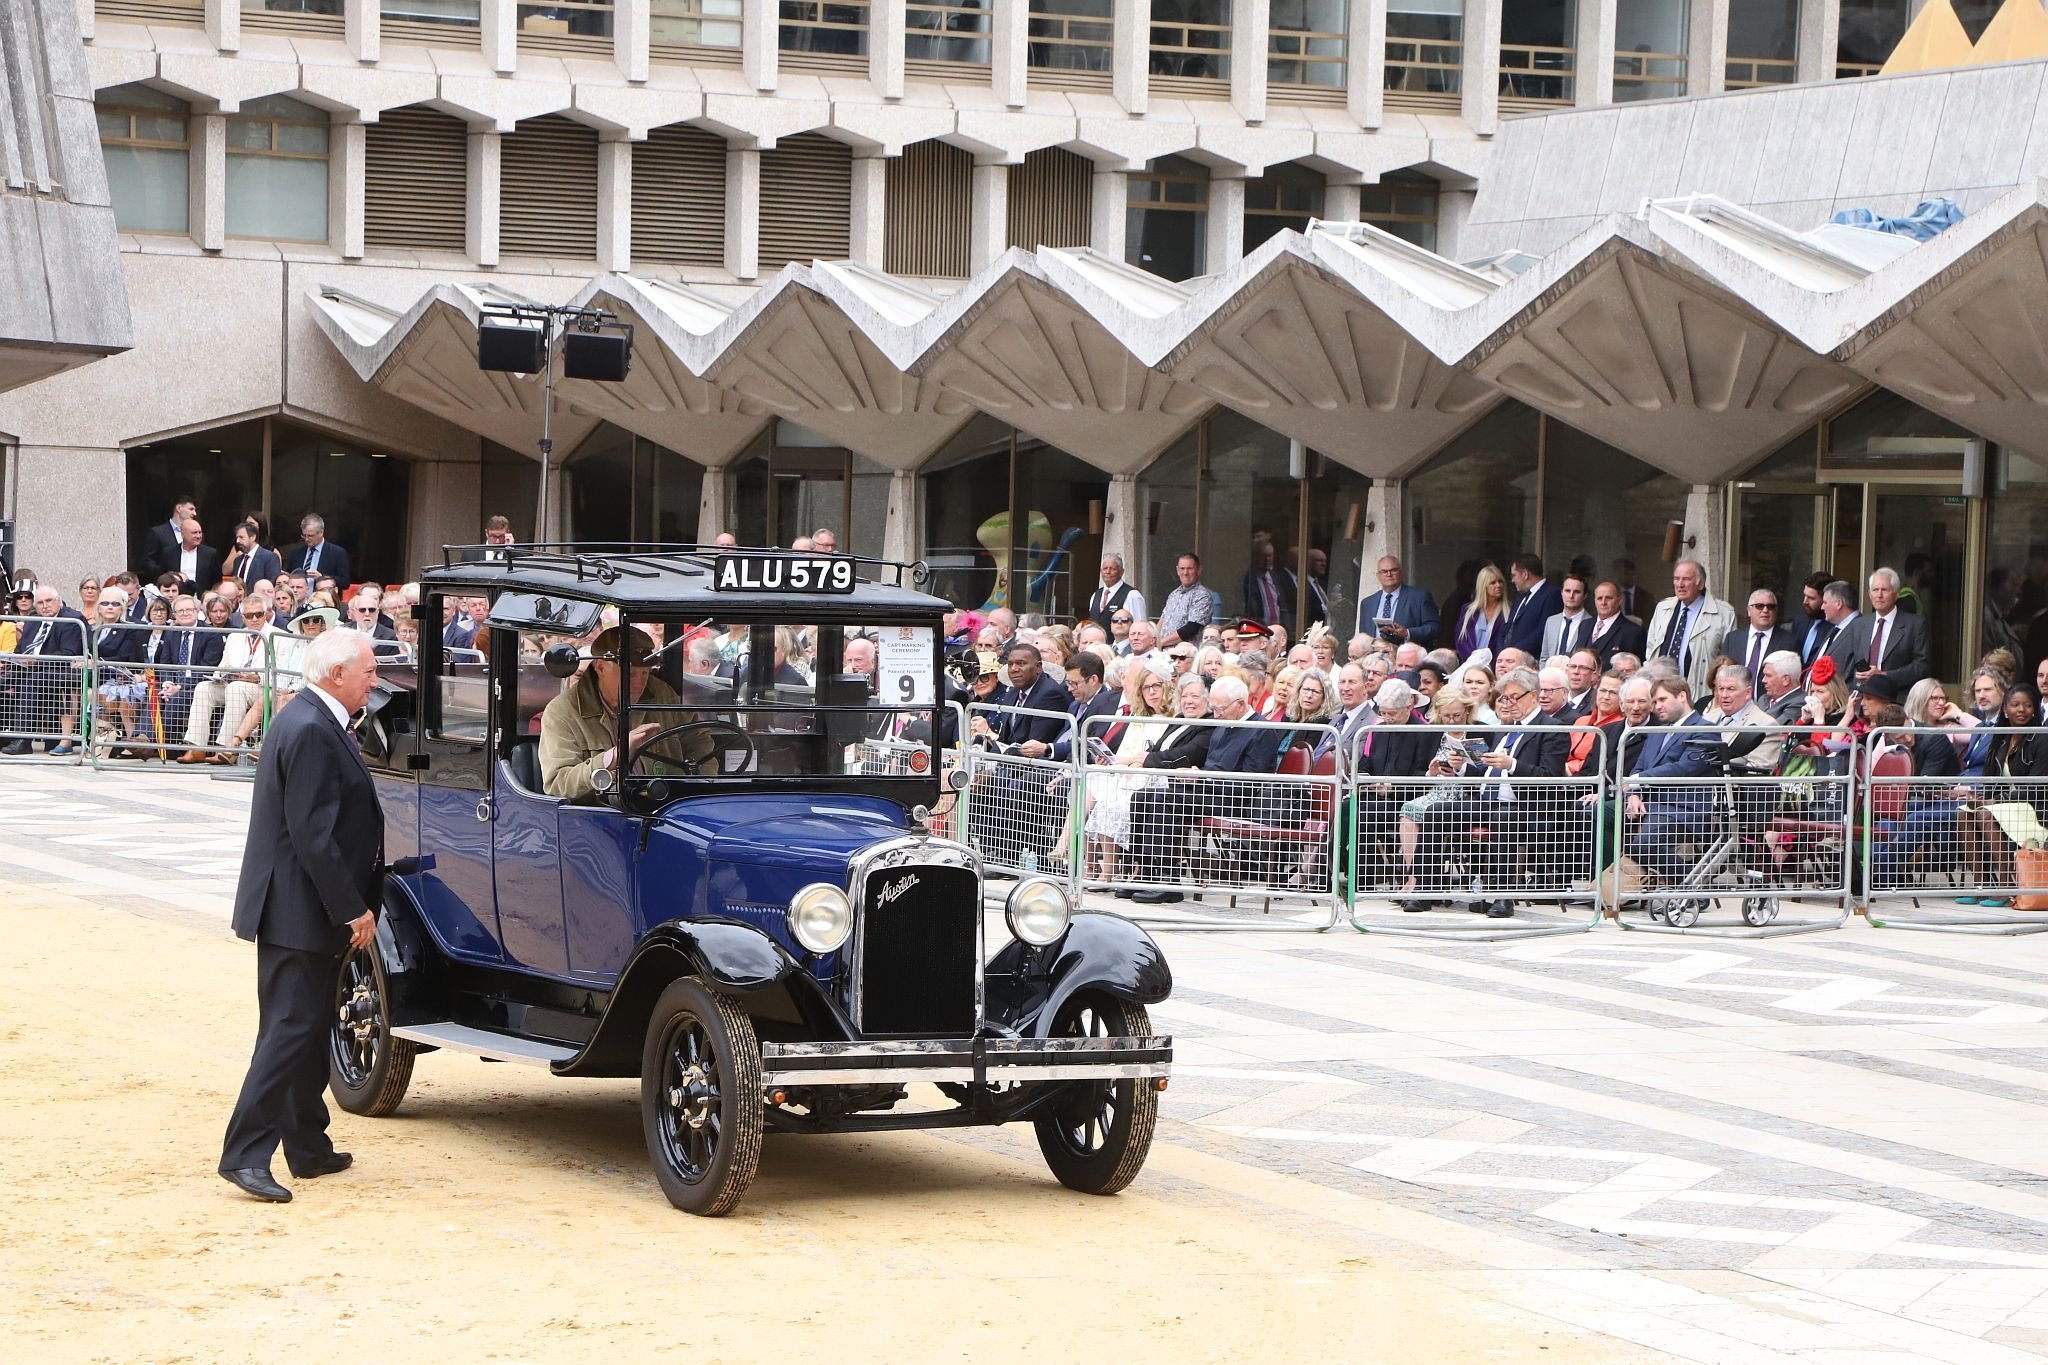 Austin Taxi 1923 ALU579. City of London 2023 Cart Marking in Guildhall Yard on 22-Jul-2023. Hosted by the Worshipful Company of Carmen with the Lord Mayor of the City of London in attendance. Wooden plates on the vehicles are branded with hot irons to allow them to ply for trade in the Square Mile. Another of the City Livery Company's annual ceremonies.